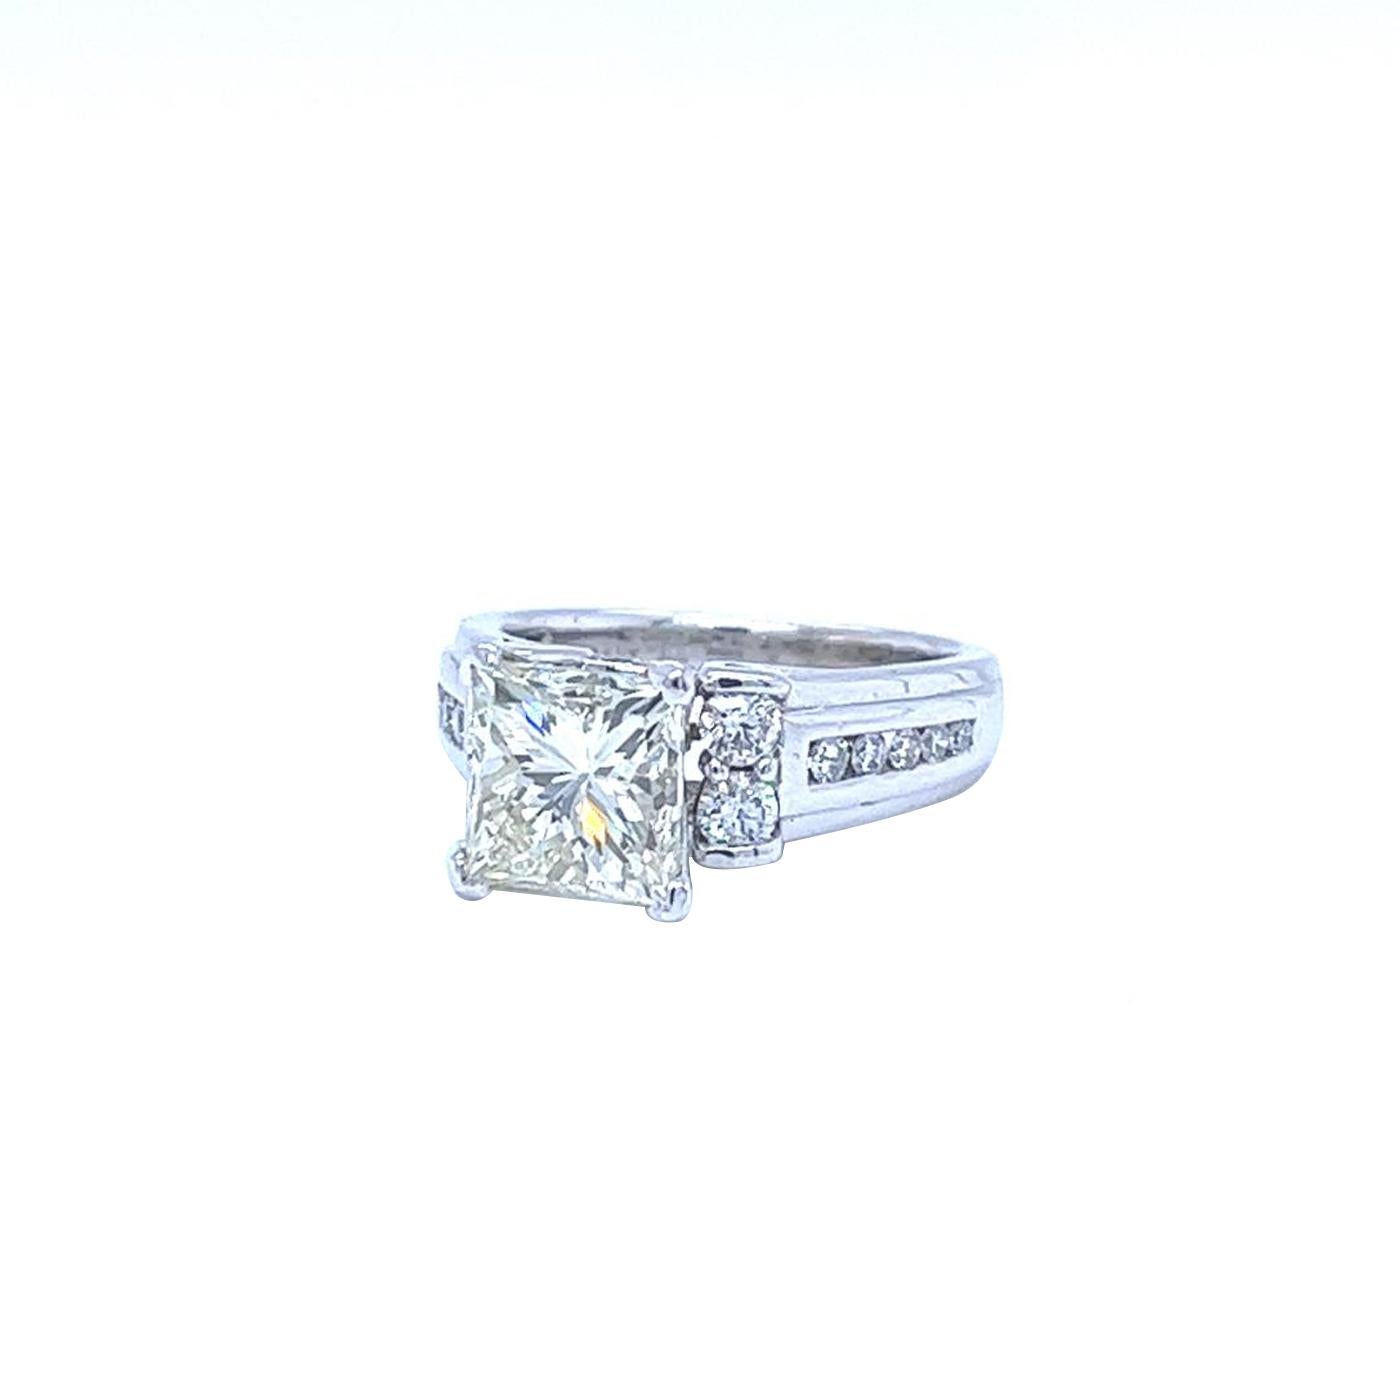 2.65ct Natural Princess Cut Diamond Engagement Ring In 4 Prong 14K White Gold In Good Condition For Sale In Aventura, FL